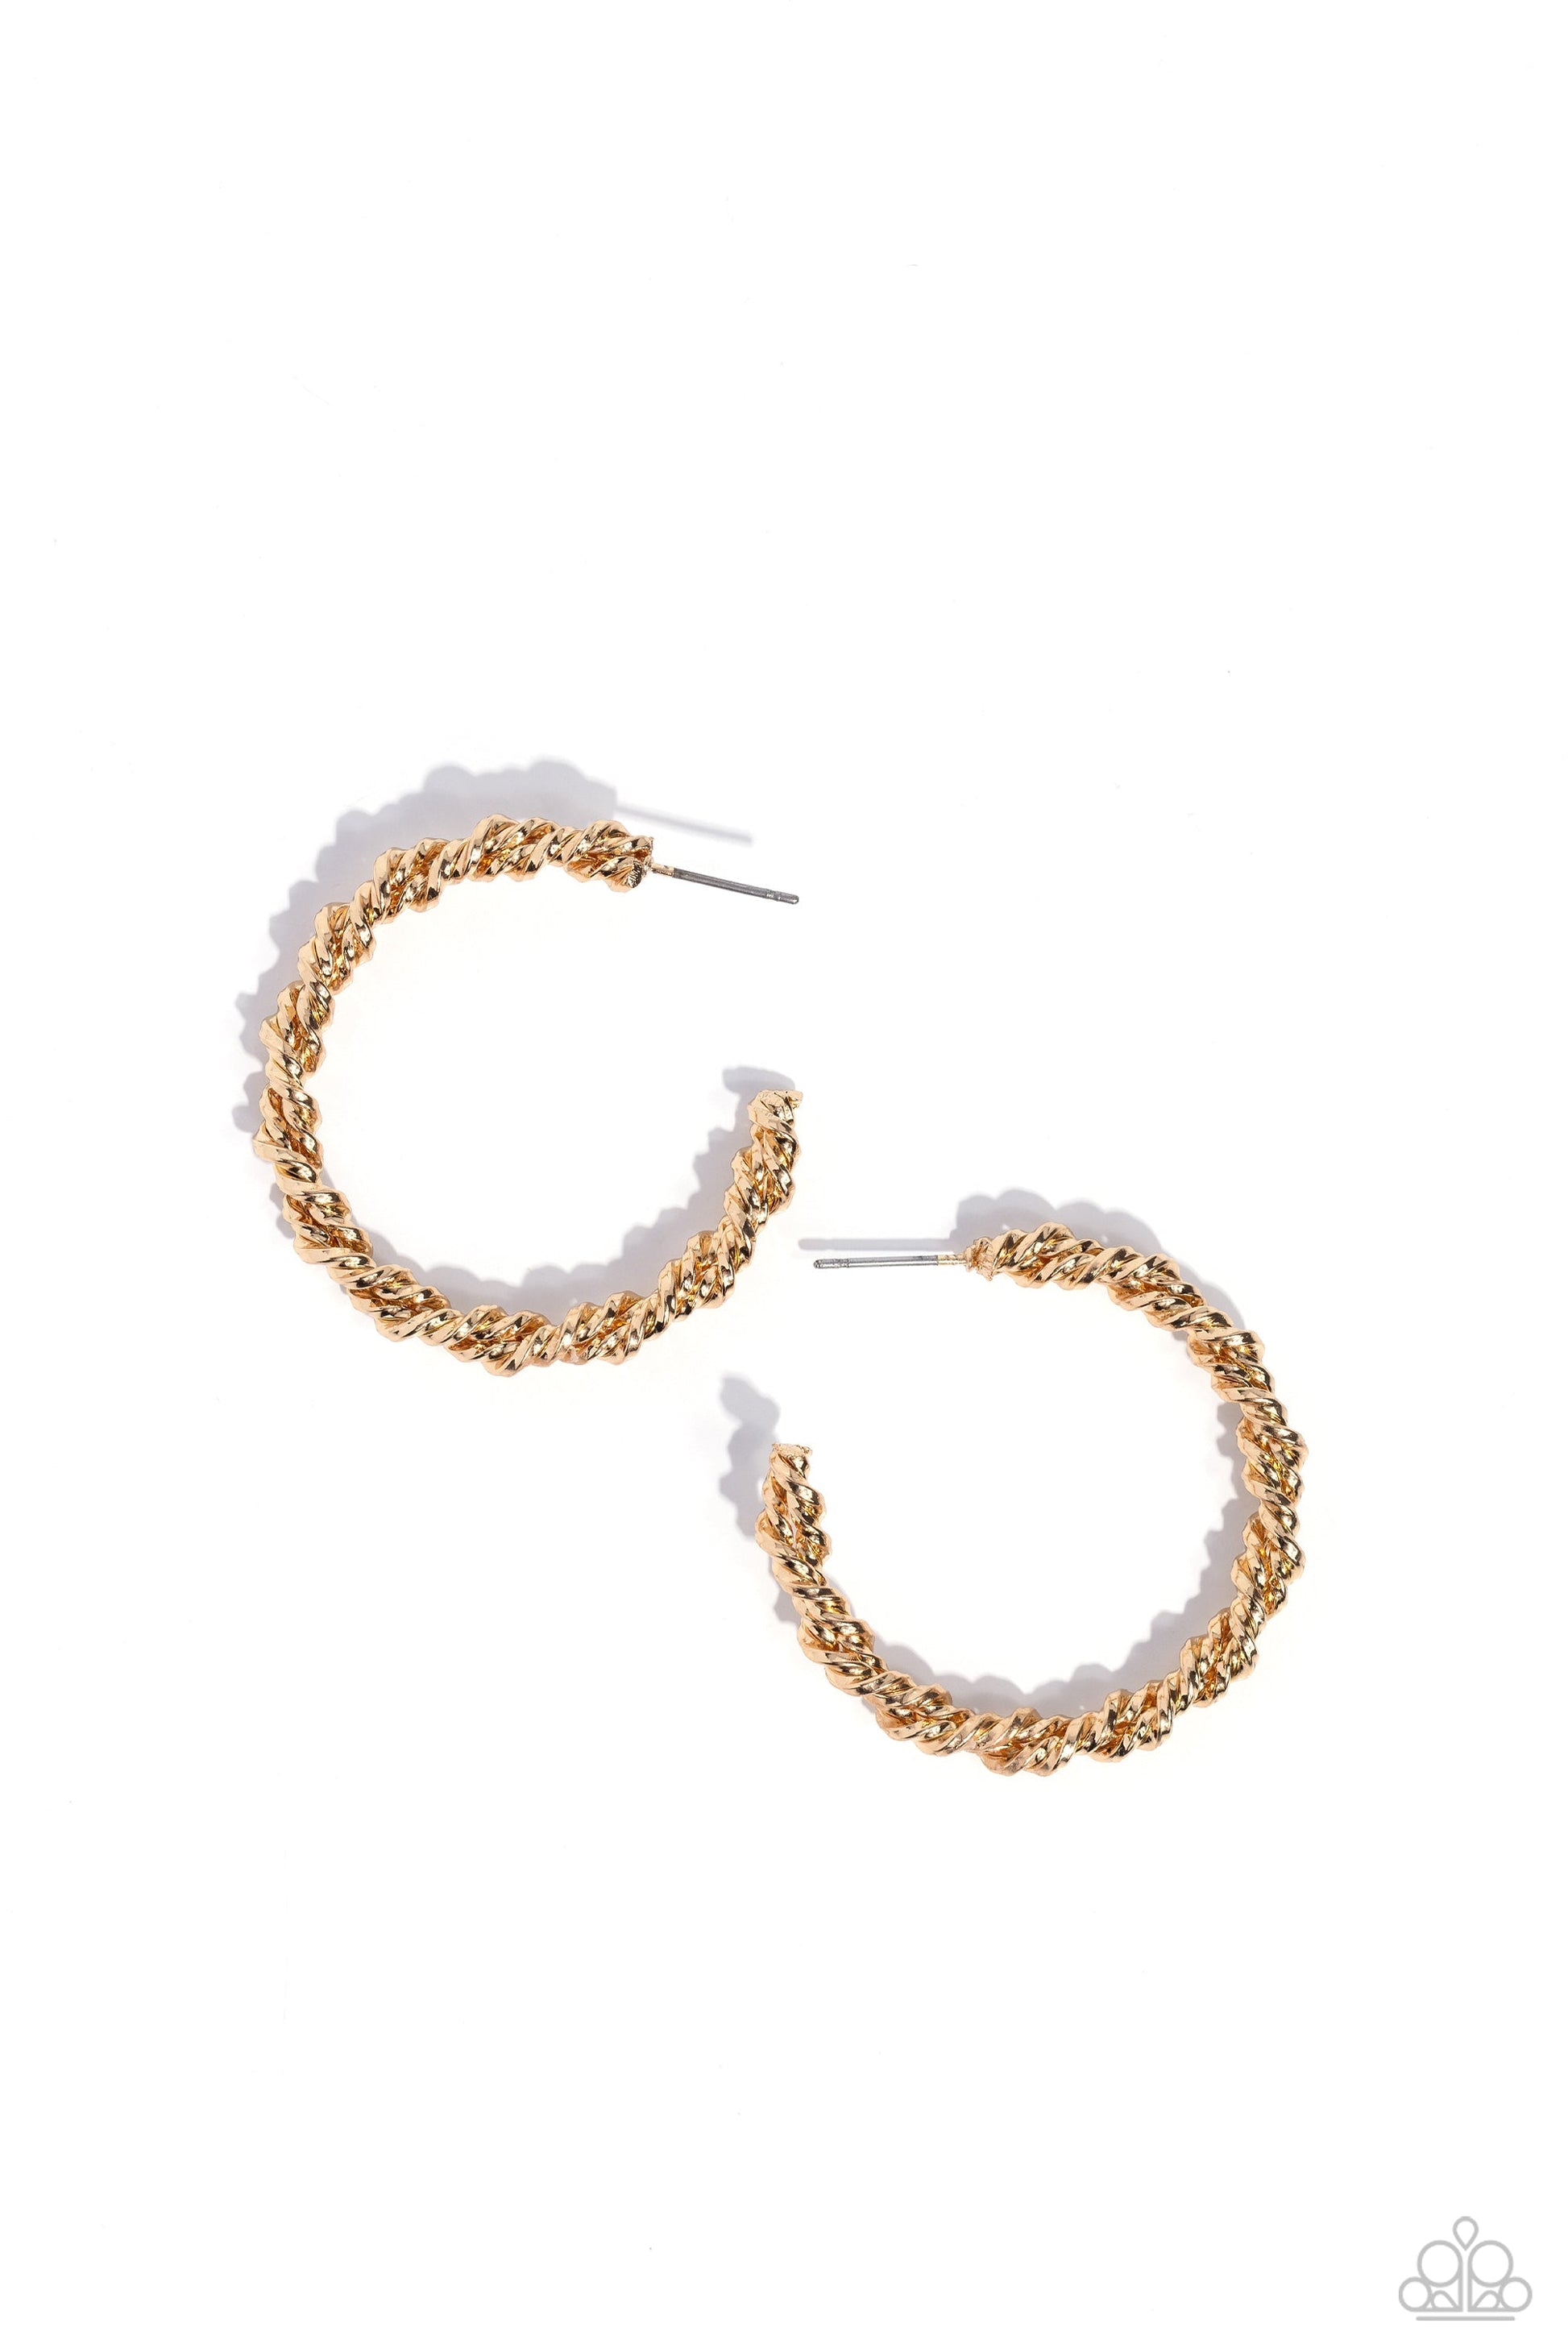 Braided Bravado - Gold Hoop Earrings - Paparazzi Accessories - Featuring a braided motif, twisted gold ribbons encircle the ear for an industrially glitzy statement. Earring attaches to a standard post fitting. Hoop measures approximately 1 1/2" in diameter. Sold as one pair of hoop earrings.